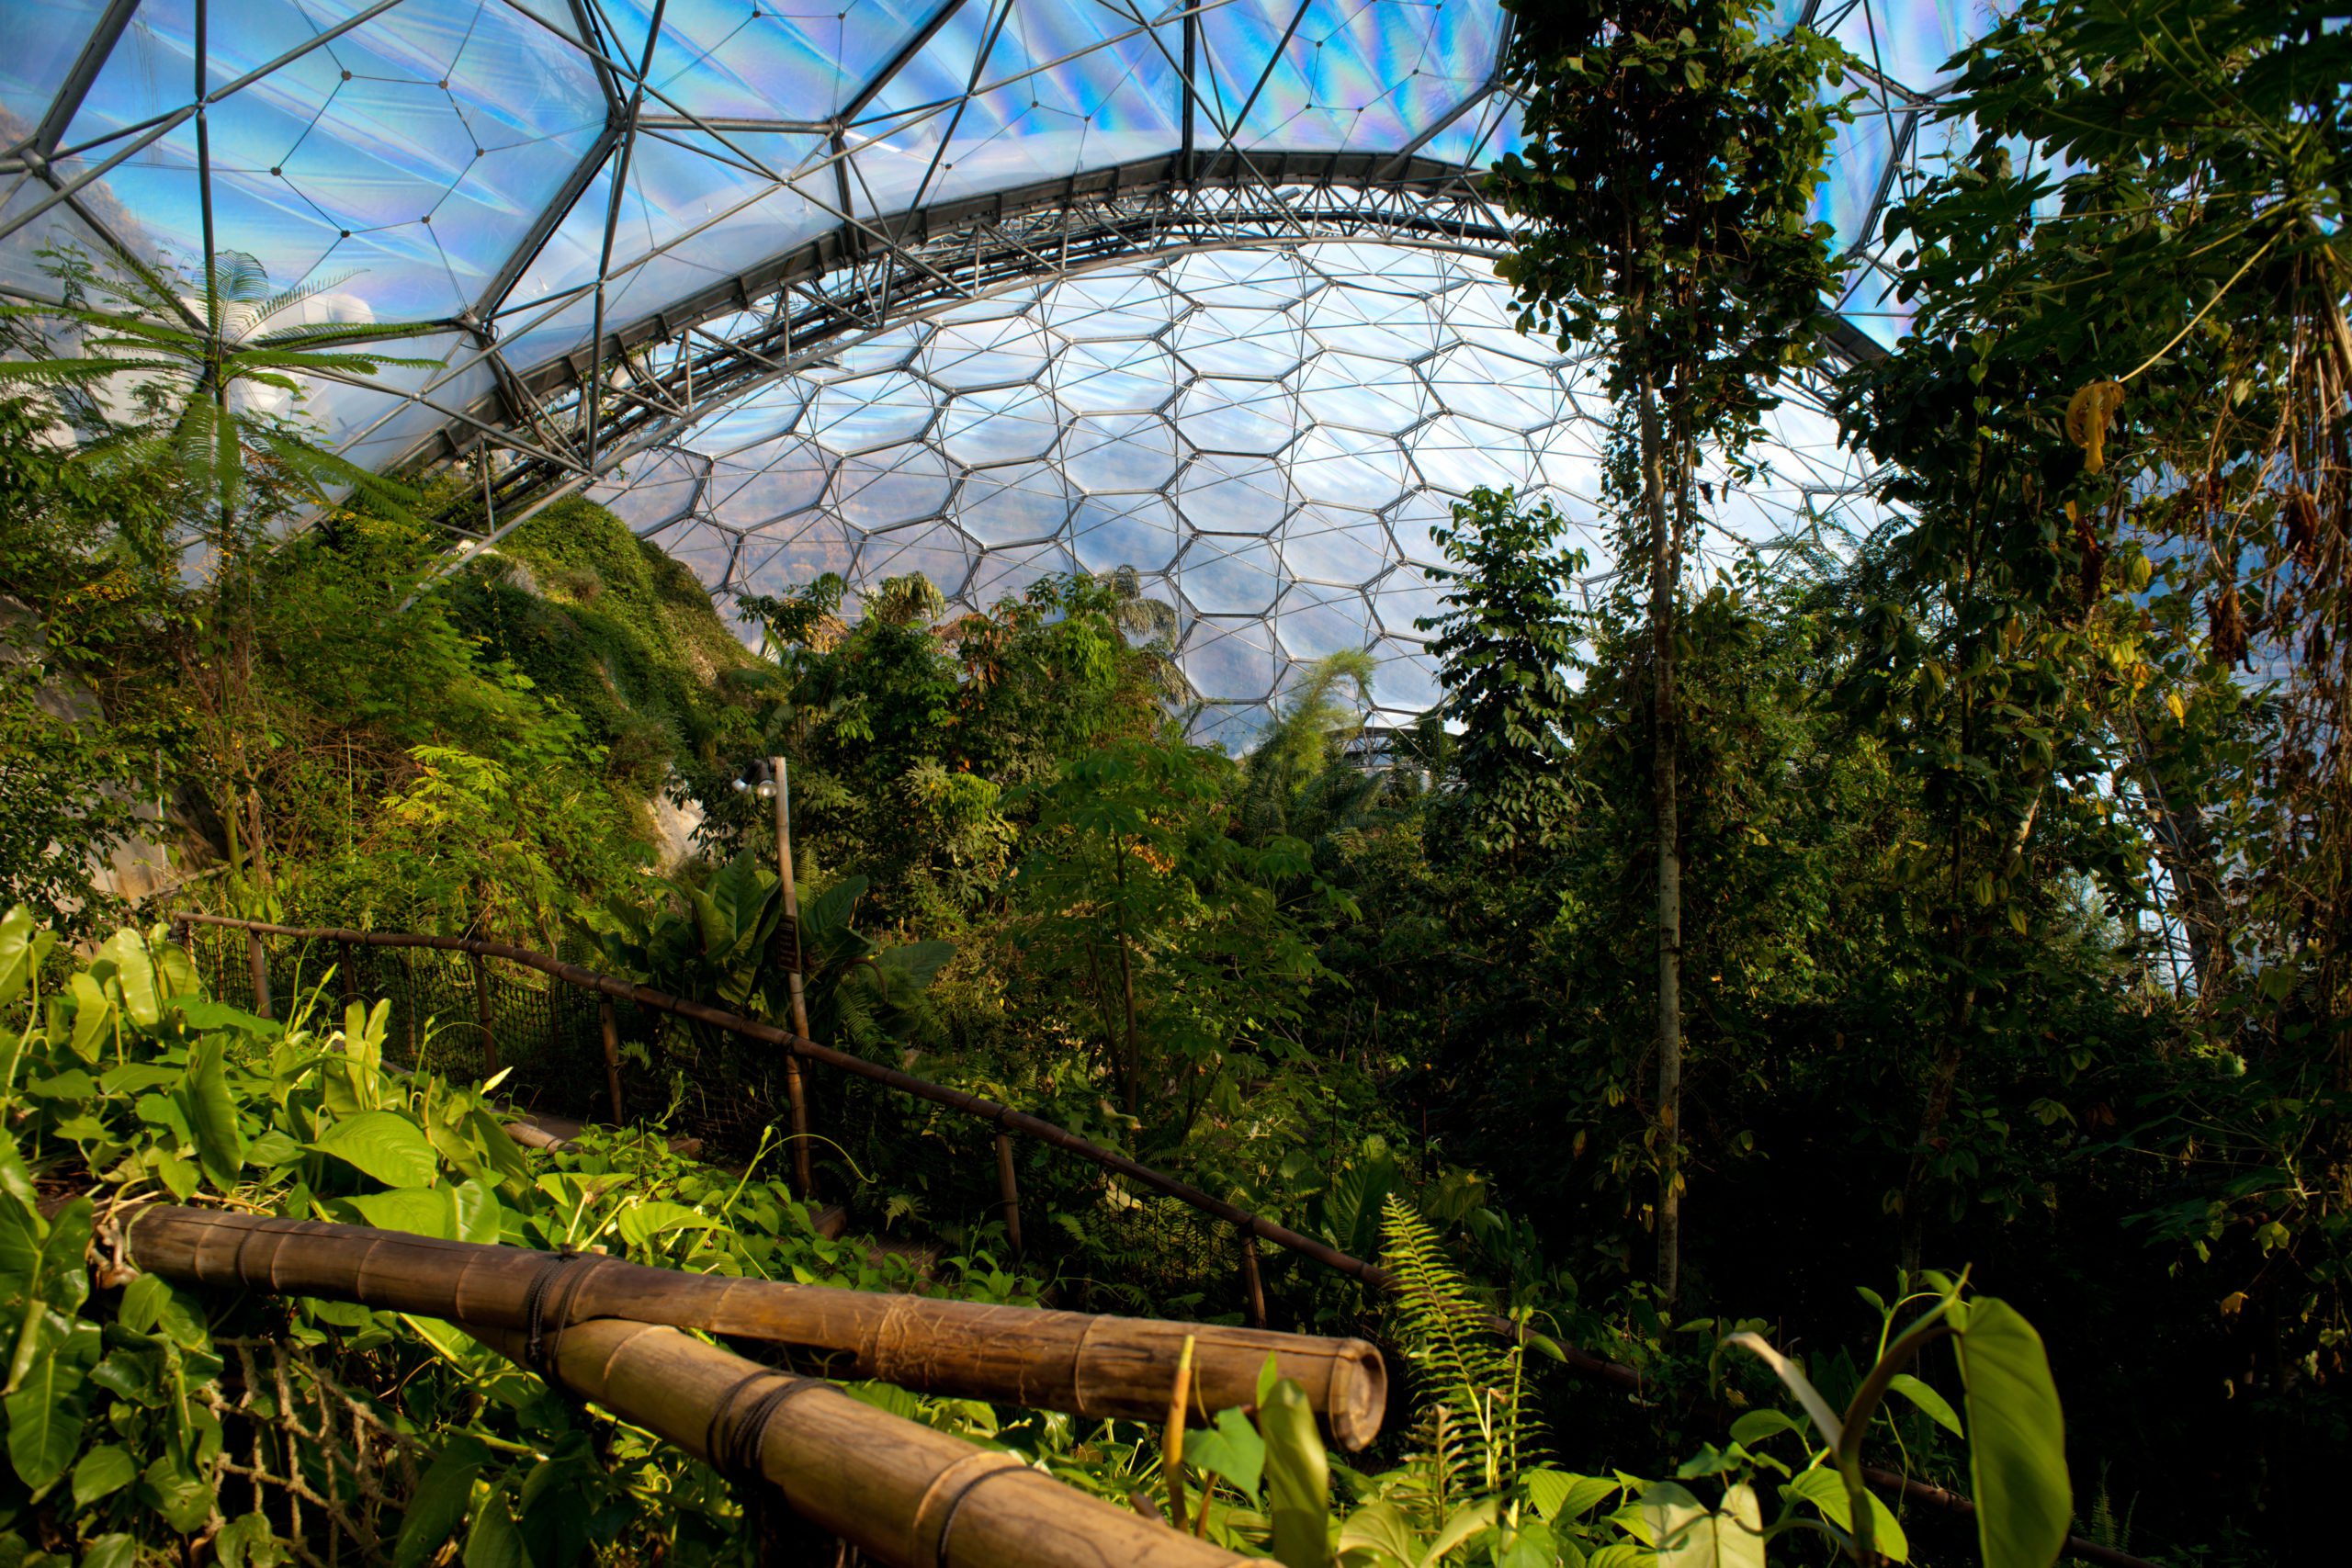 An image of a rainforest type area in a large ball